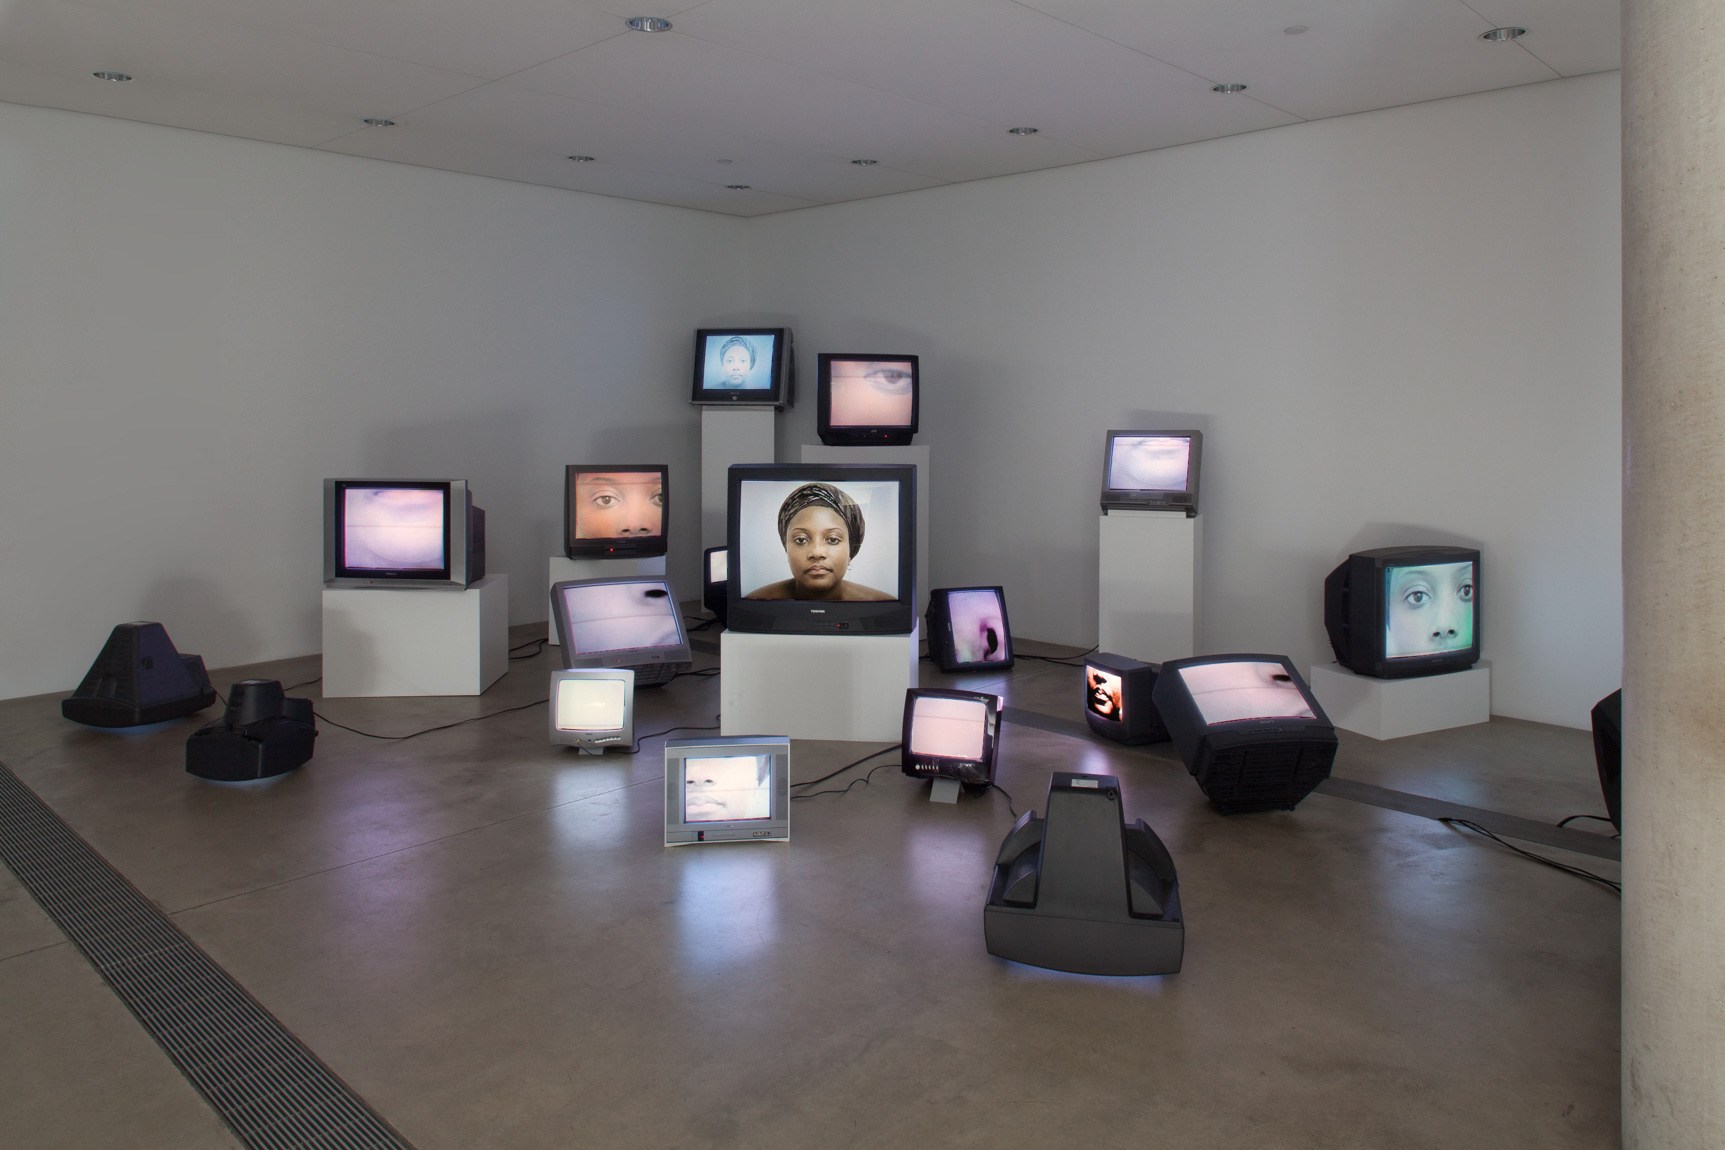 An exhibition view of Nina Saro-Wiwa's "Mourning Class: Nollywood," an installation made up of TV screens and monitors displaying images of the artist's face.